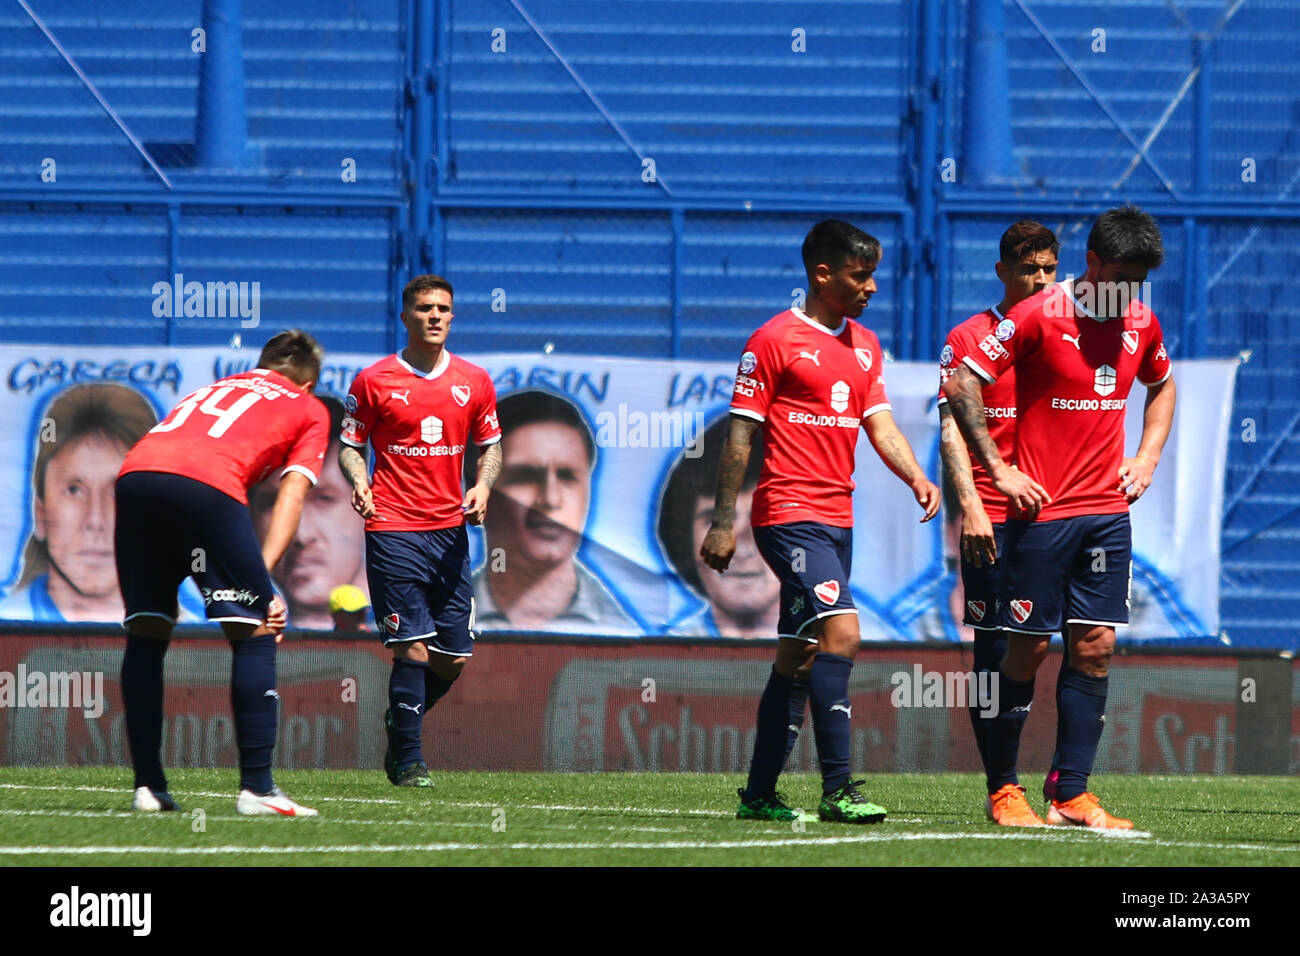 BUENOS AIRES, 06.10.2019: Players of Independiente after the match between Velez Sarsfield and Independiente at José Amalfitani Stadium in Buenos Aire Stock Photo